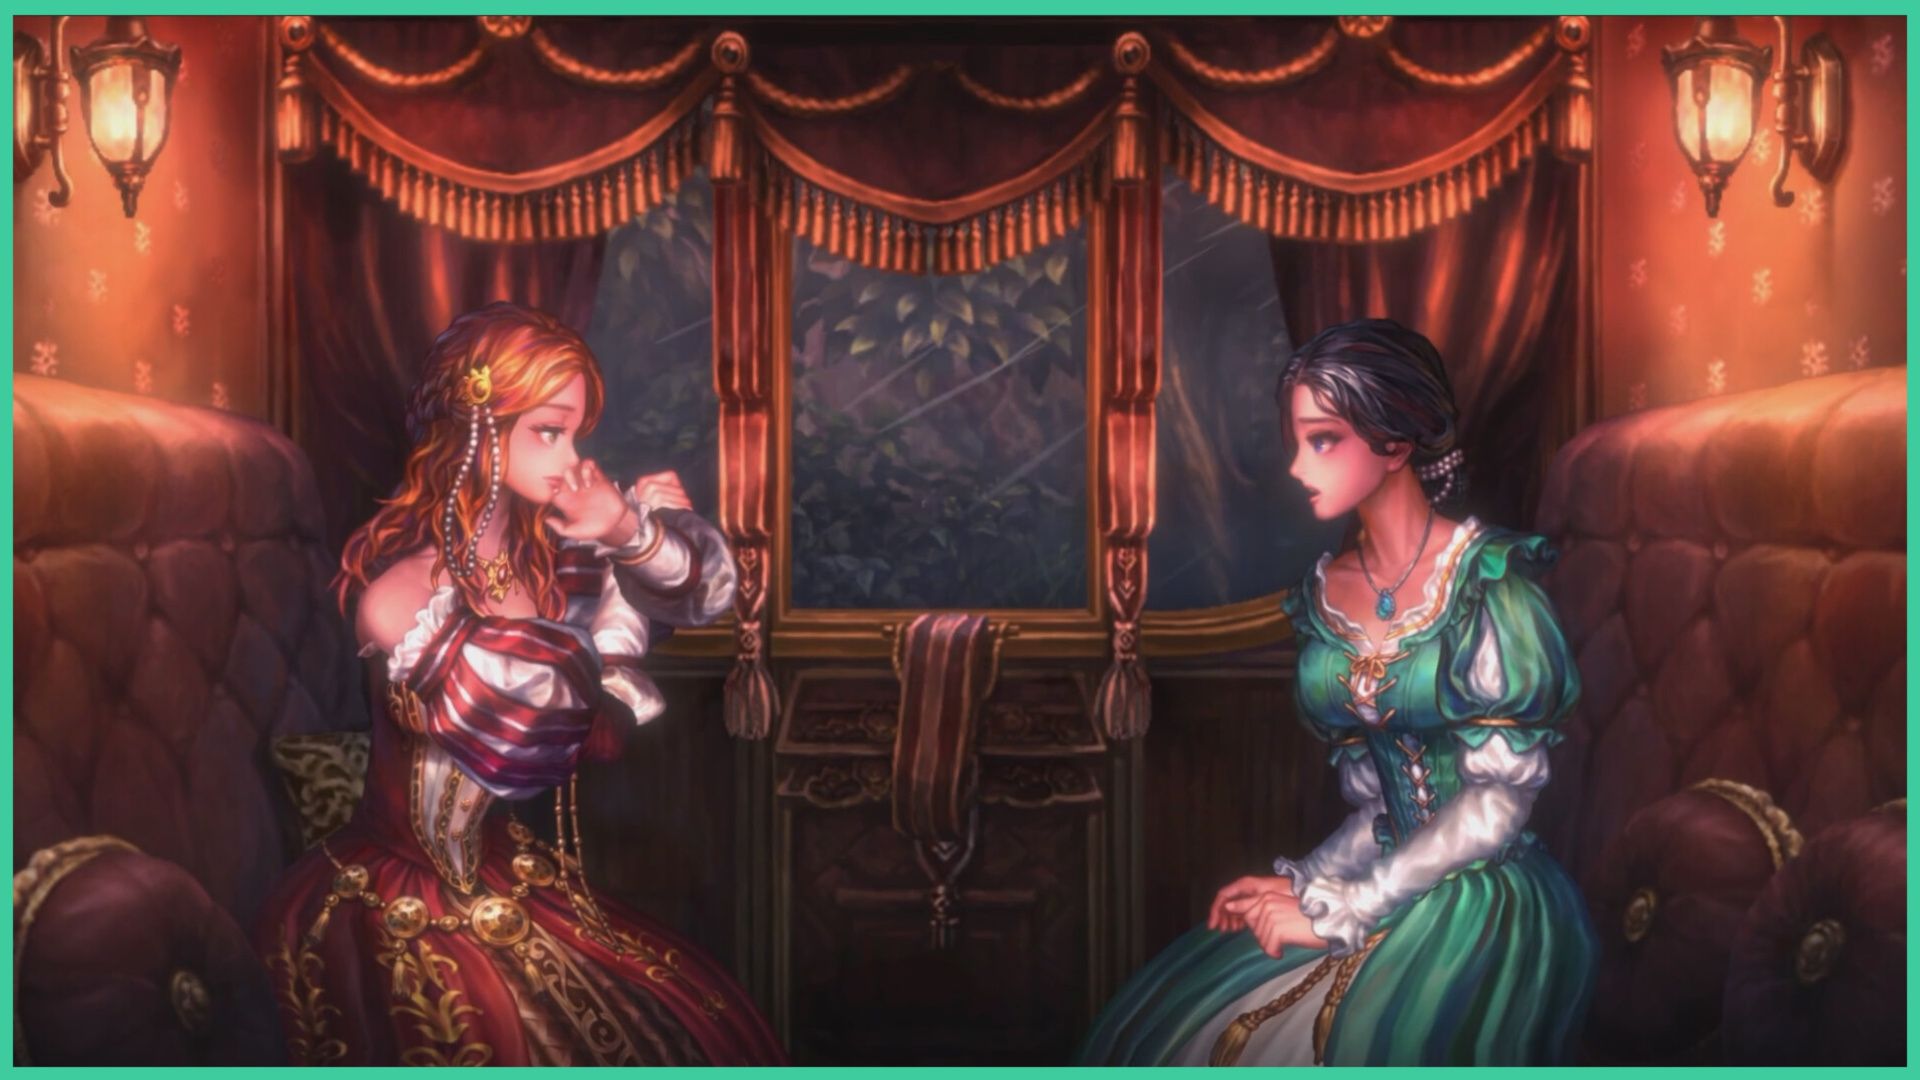 feature image for our astra knights of veda tier list, the image is a promo shot for the game of 2 female characters sat inside a carriage talking to each other, the character on the right looks distressed as she speaks, while the other rests her chin on her hand